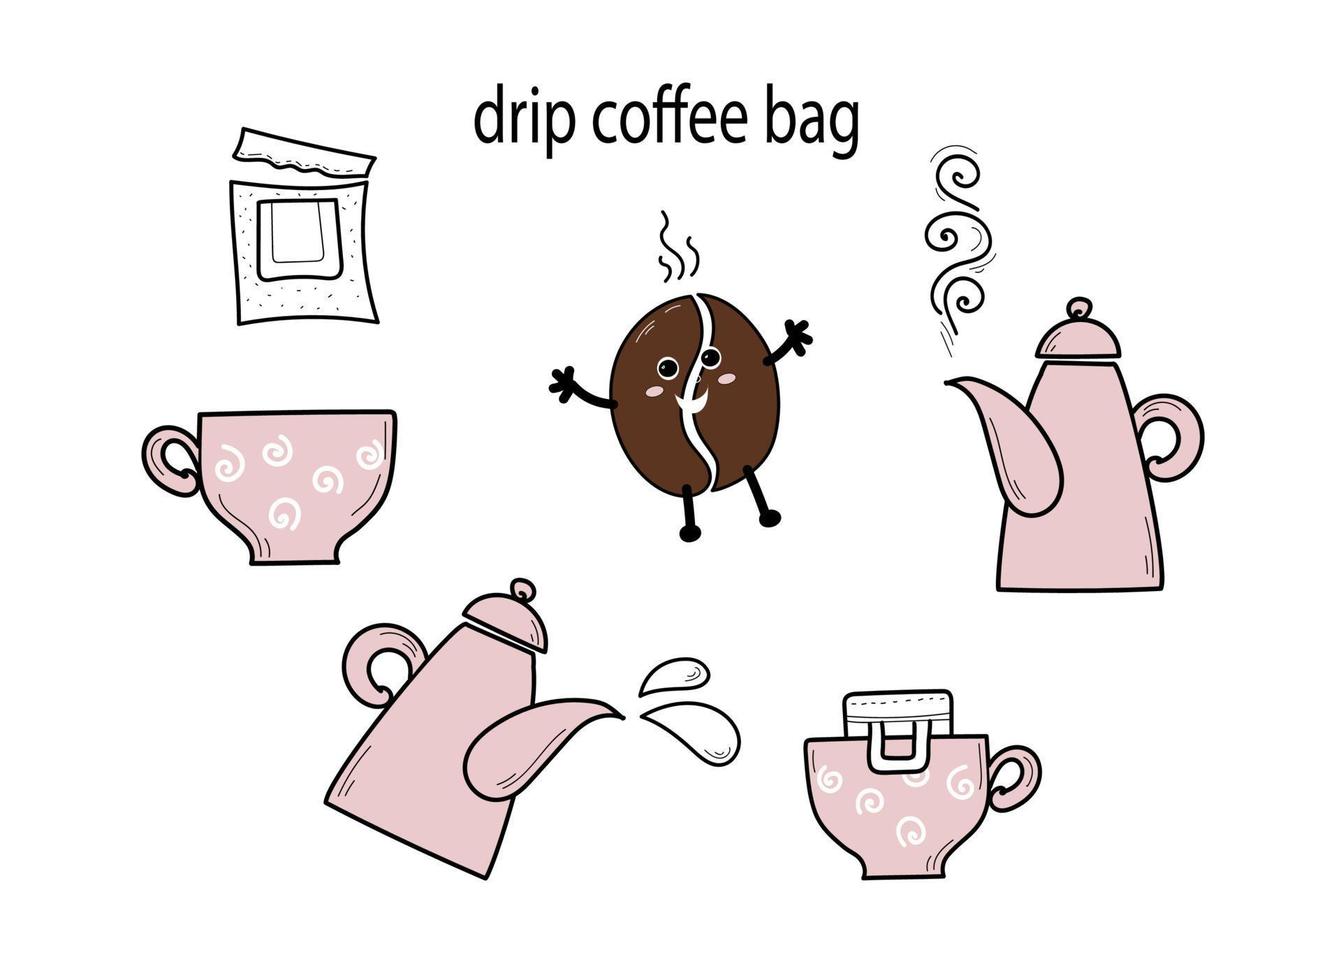 Drip coffee bag for easy brewing in a cup. Set of vector hand drawn icons, doodle isolated illustration on white background. Instructions for making fresh coffee drink